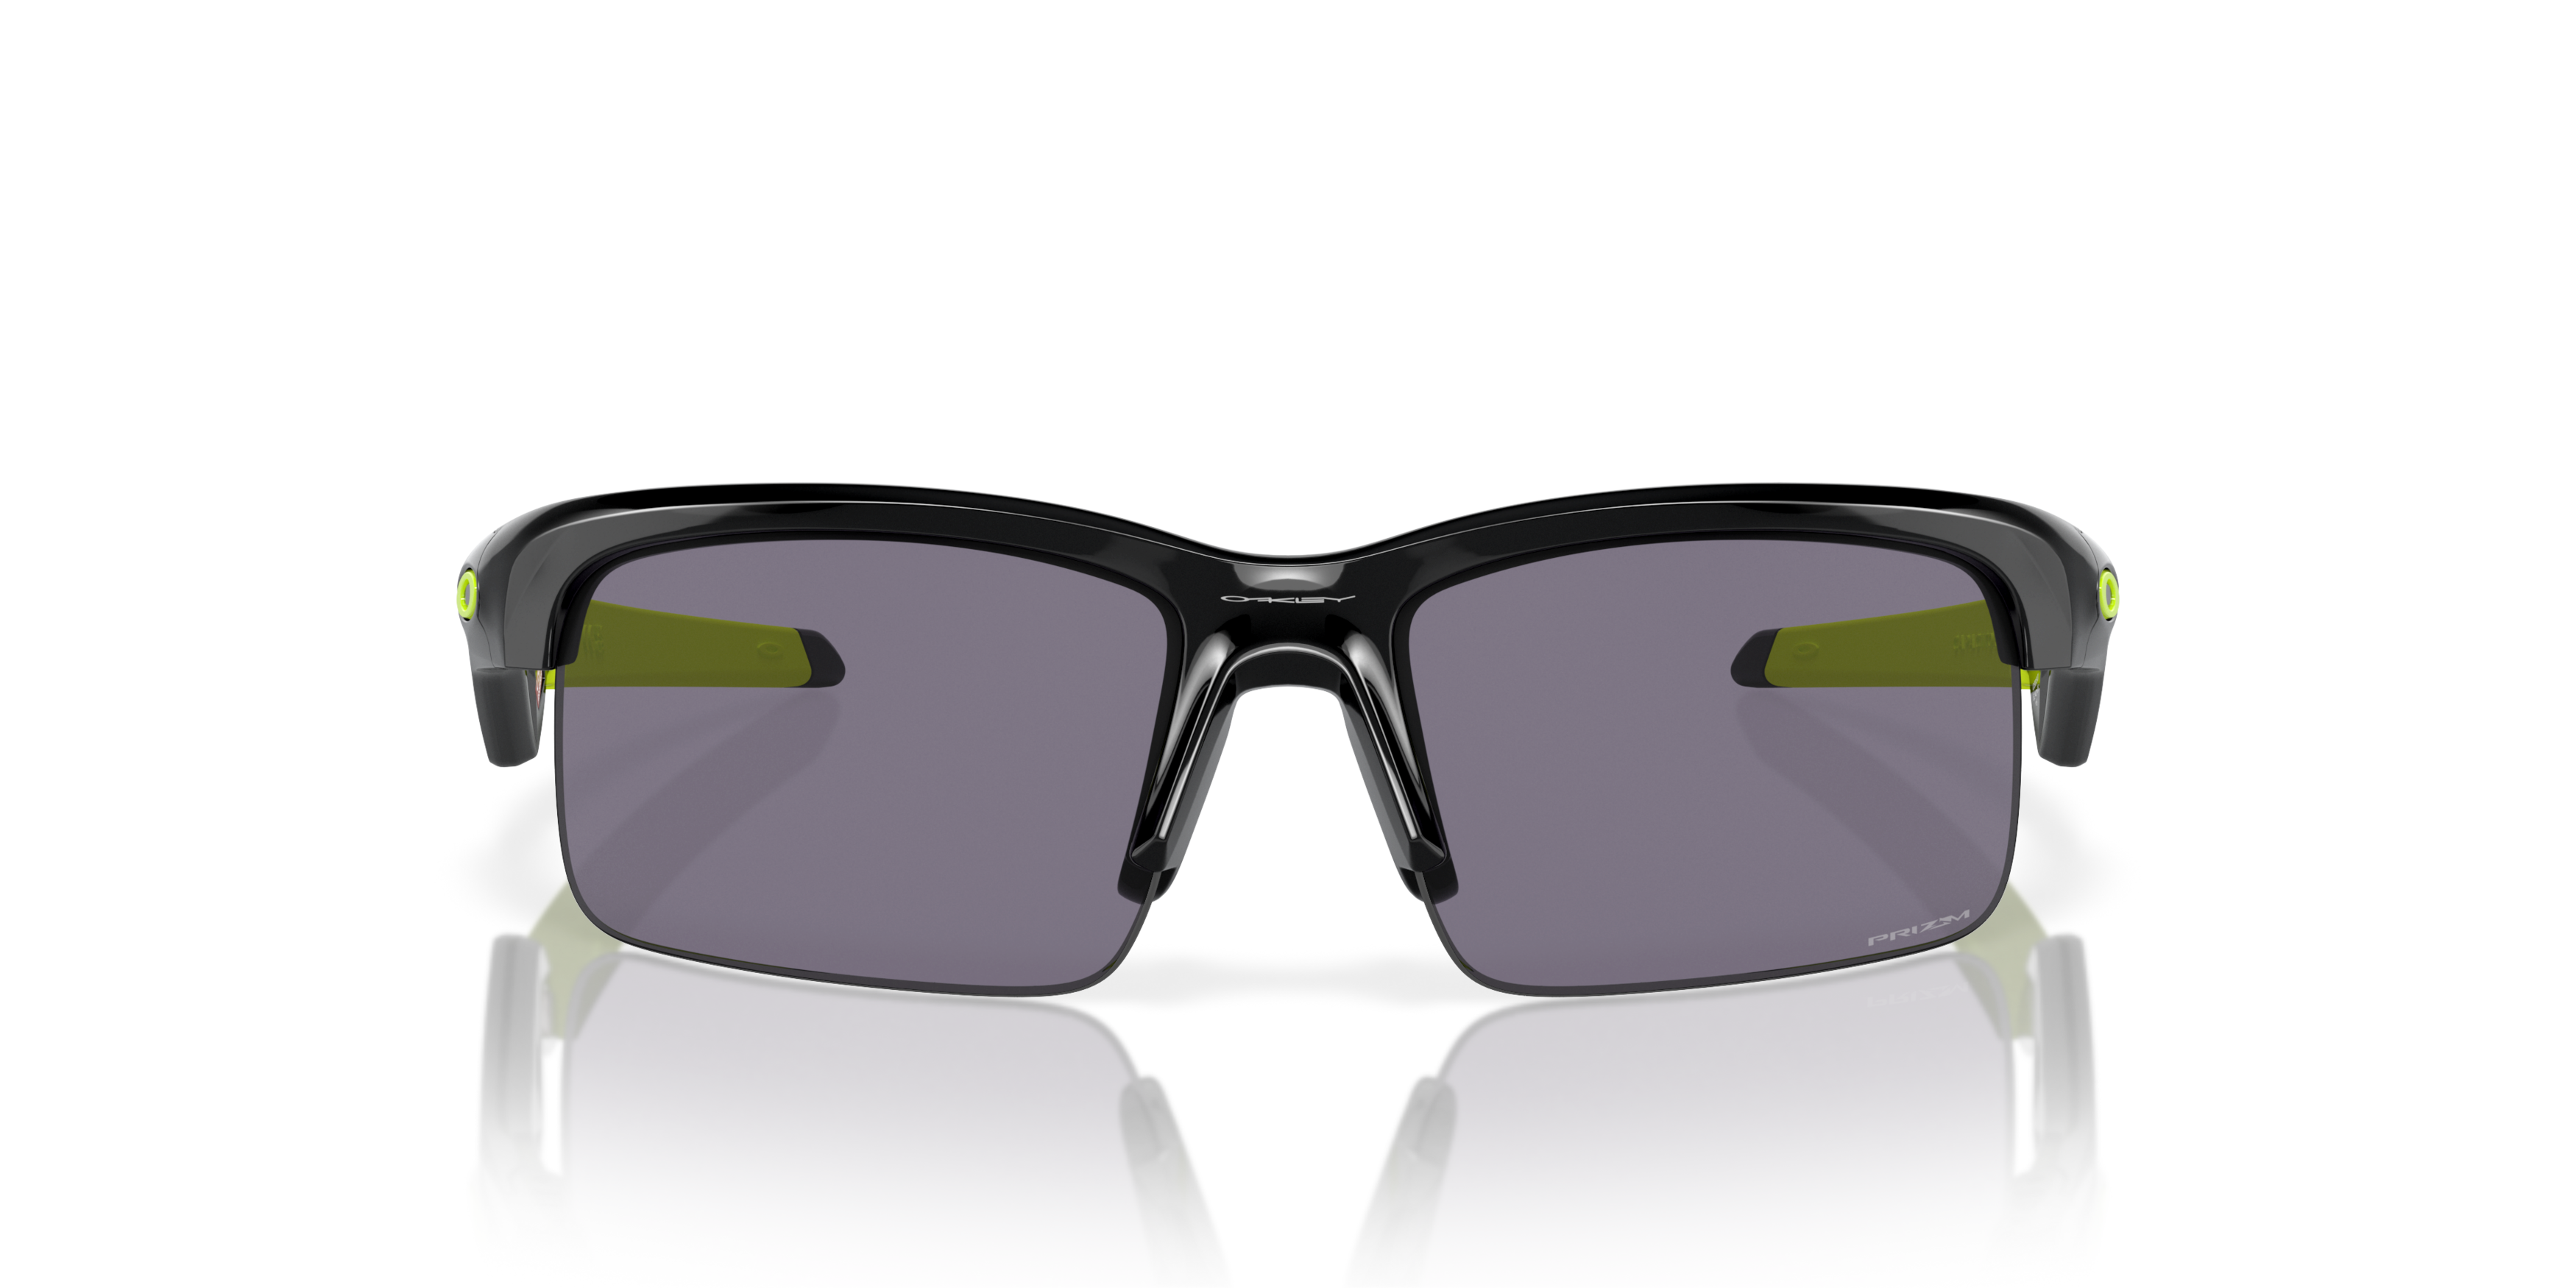 [products.image.front] OAKLEY OJ9013 901301